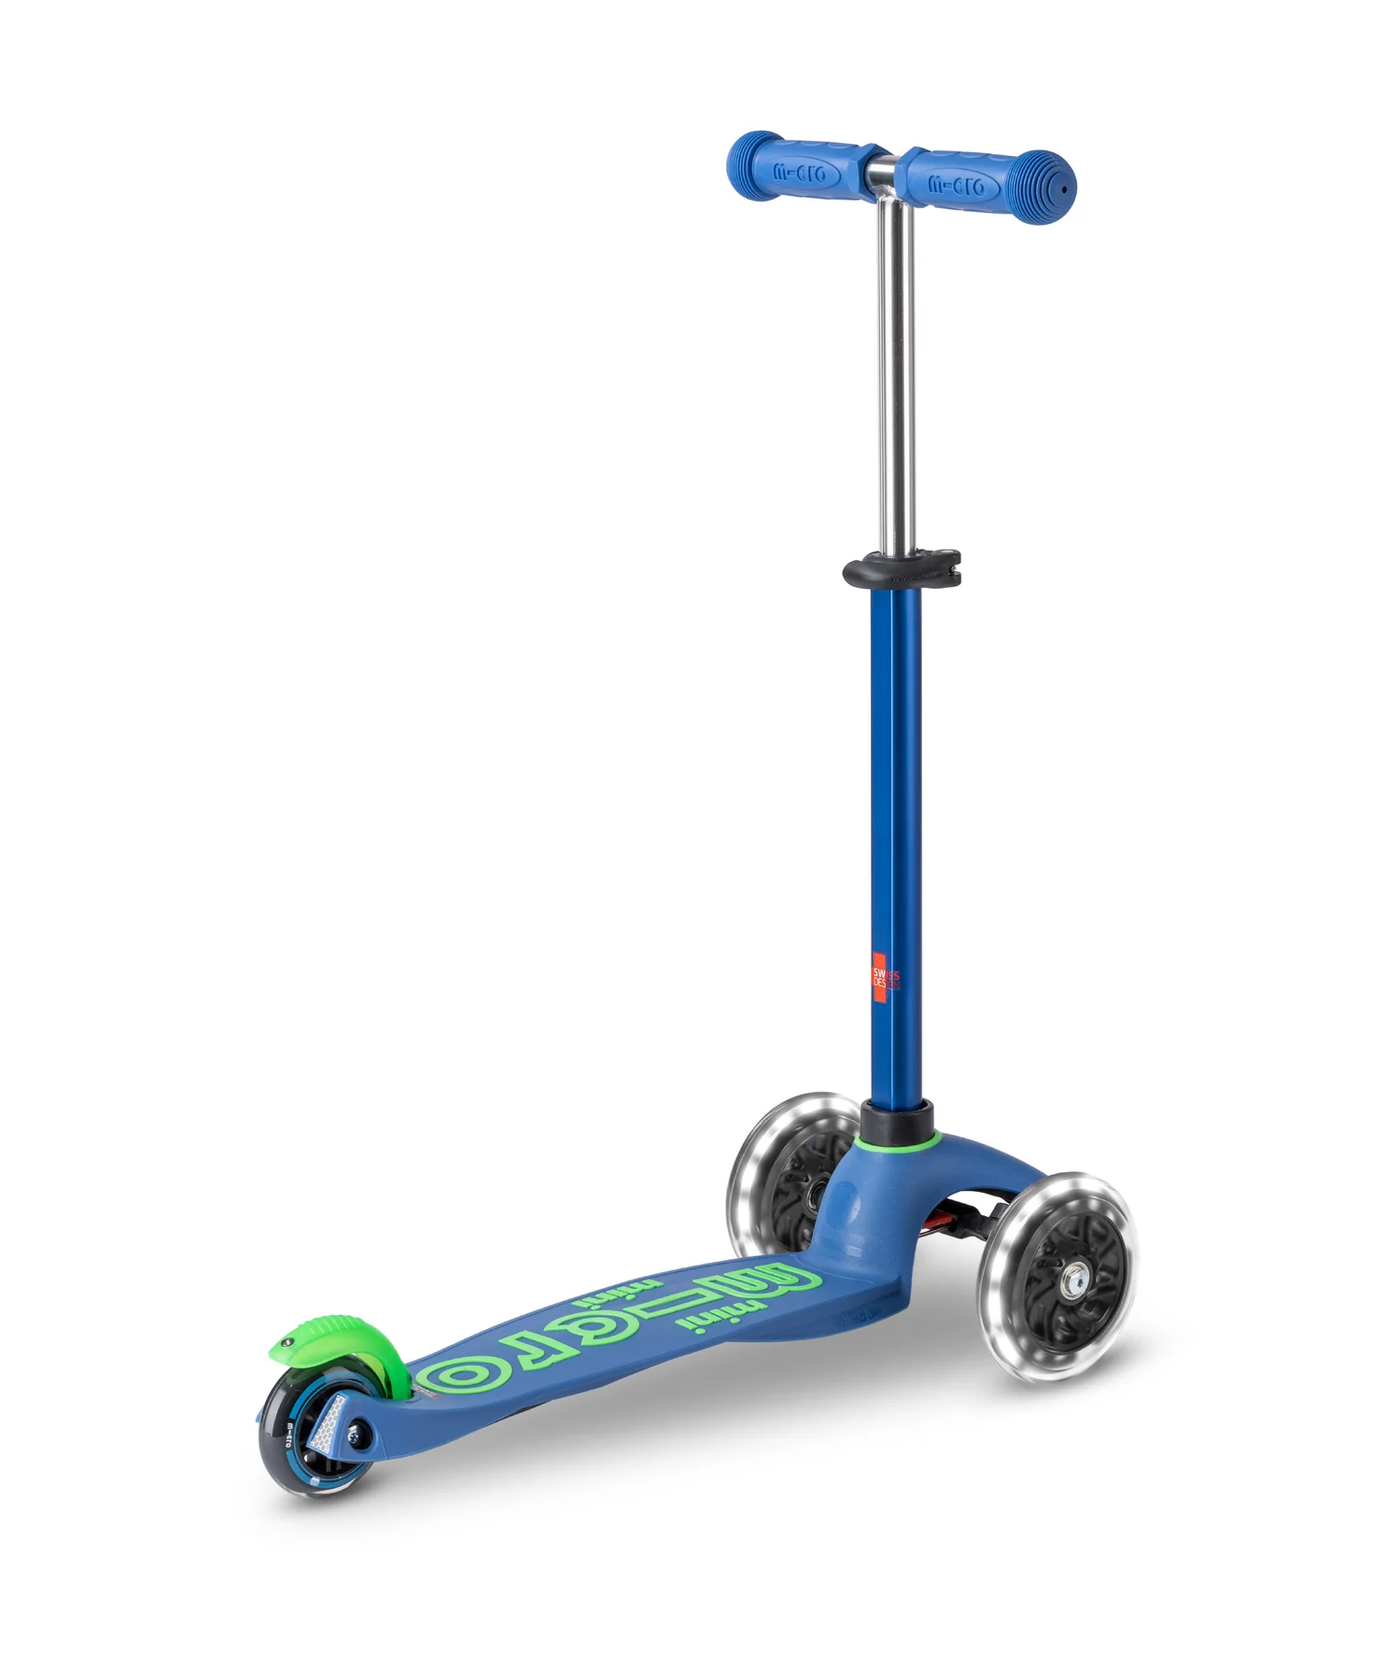 Micro Scooter Mini Deluxe LED - Crystal Blue and Green